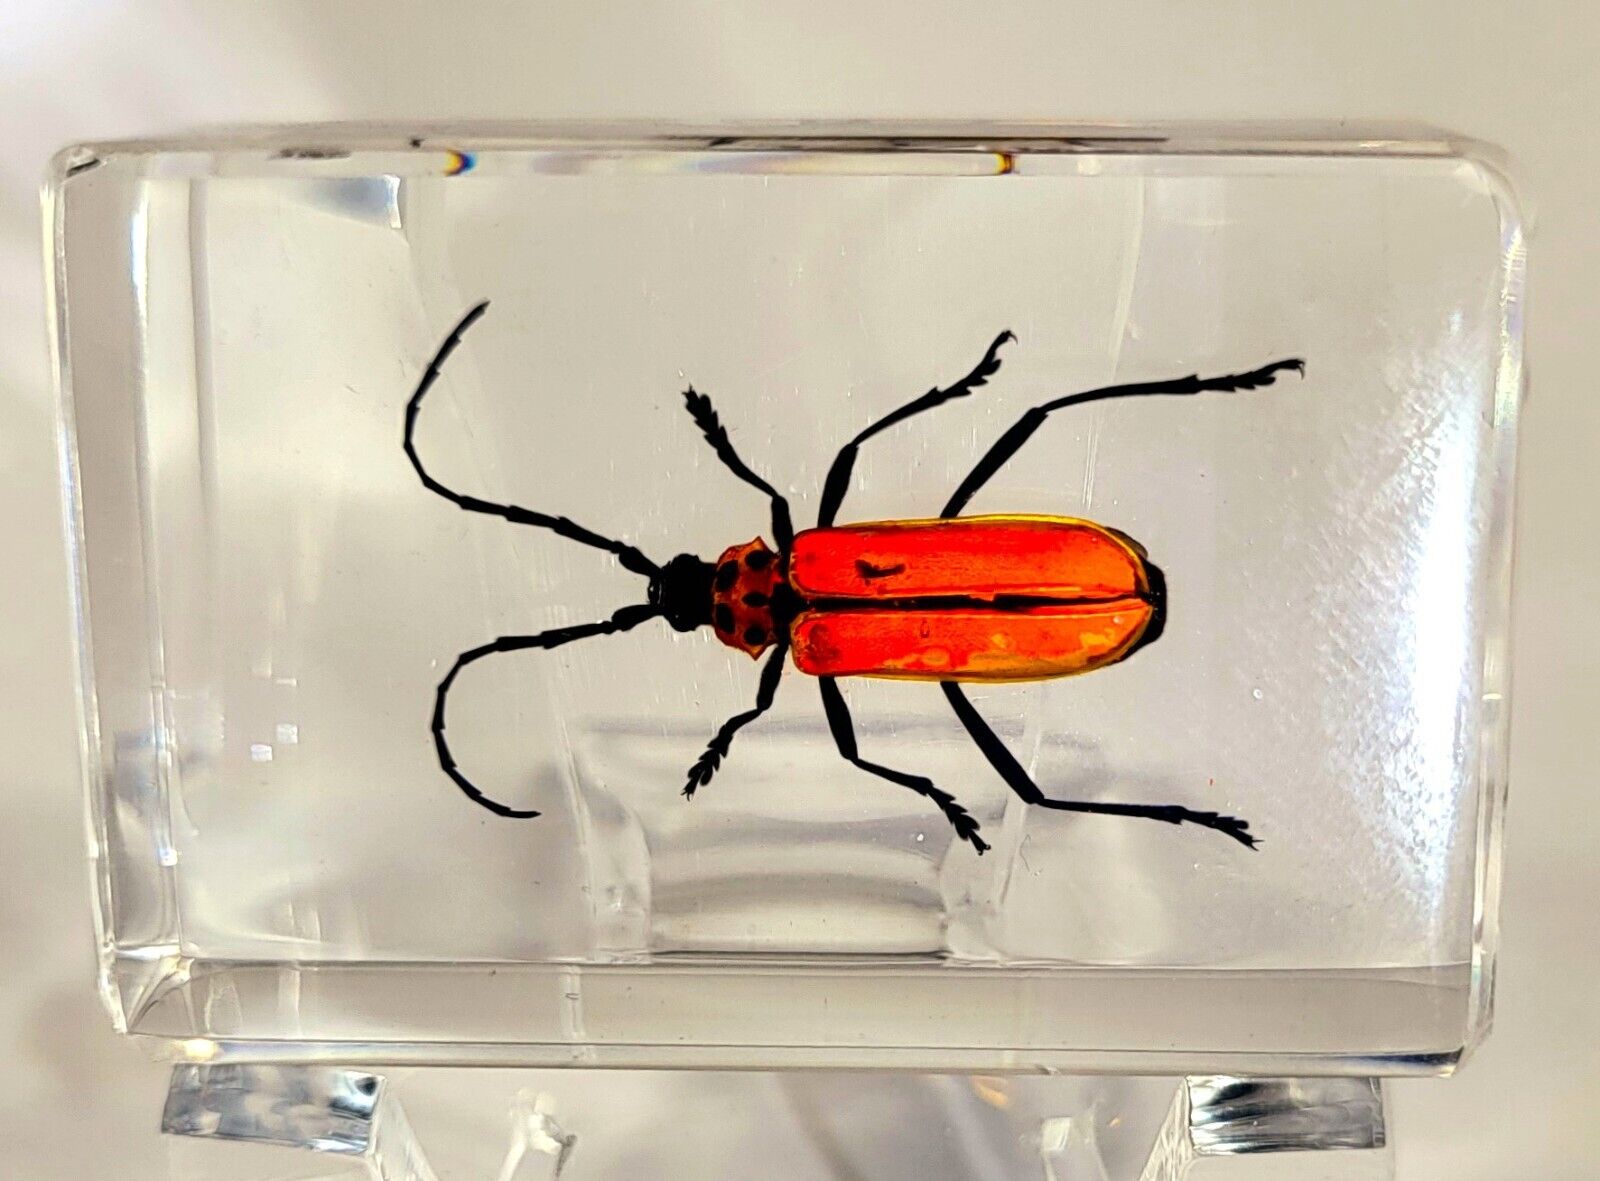 44mm Real Red Longhorn Beetle in Clear Lucite Resin Science Education Specimen